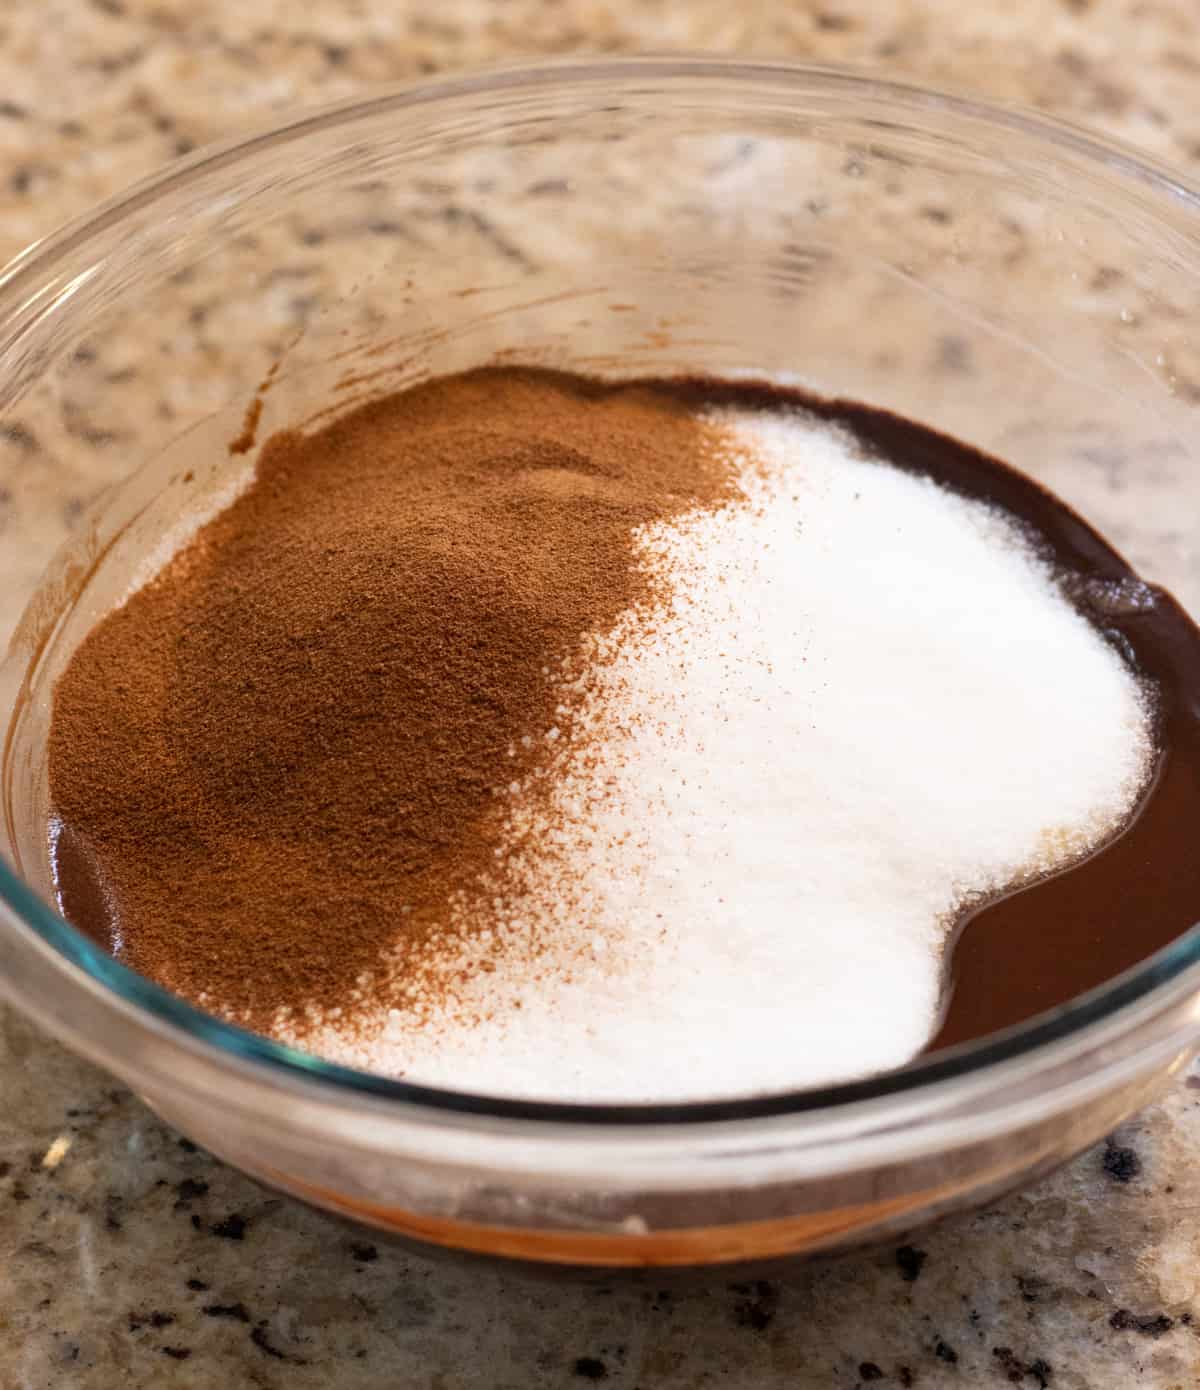 Sugar and espresso powder in a glass bowl with melted chocolate.